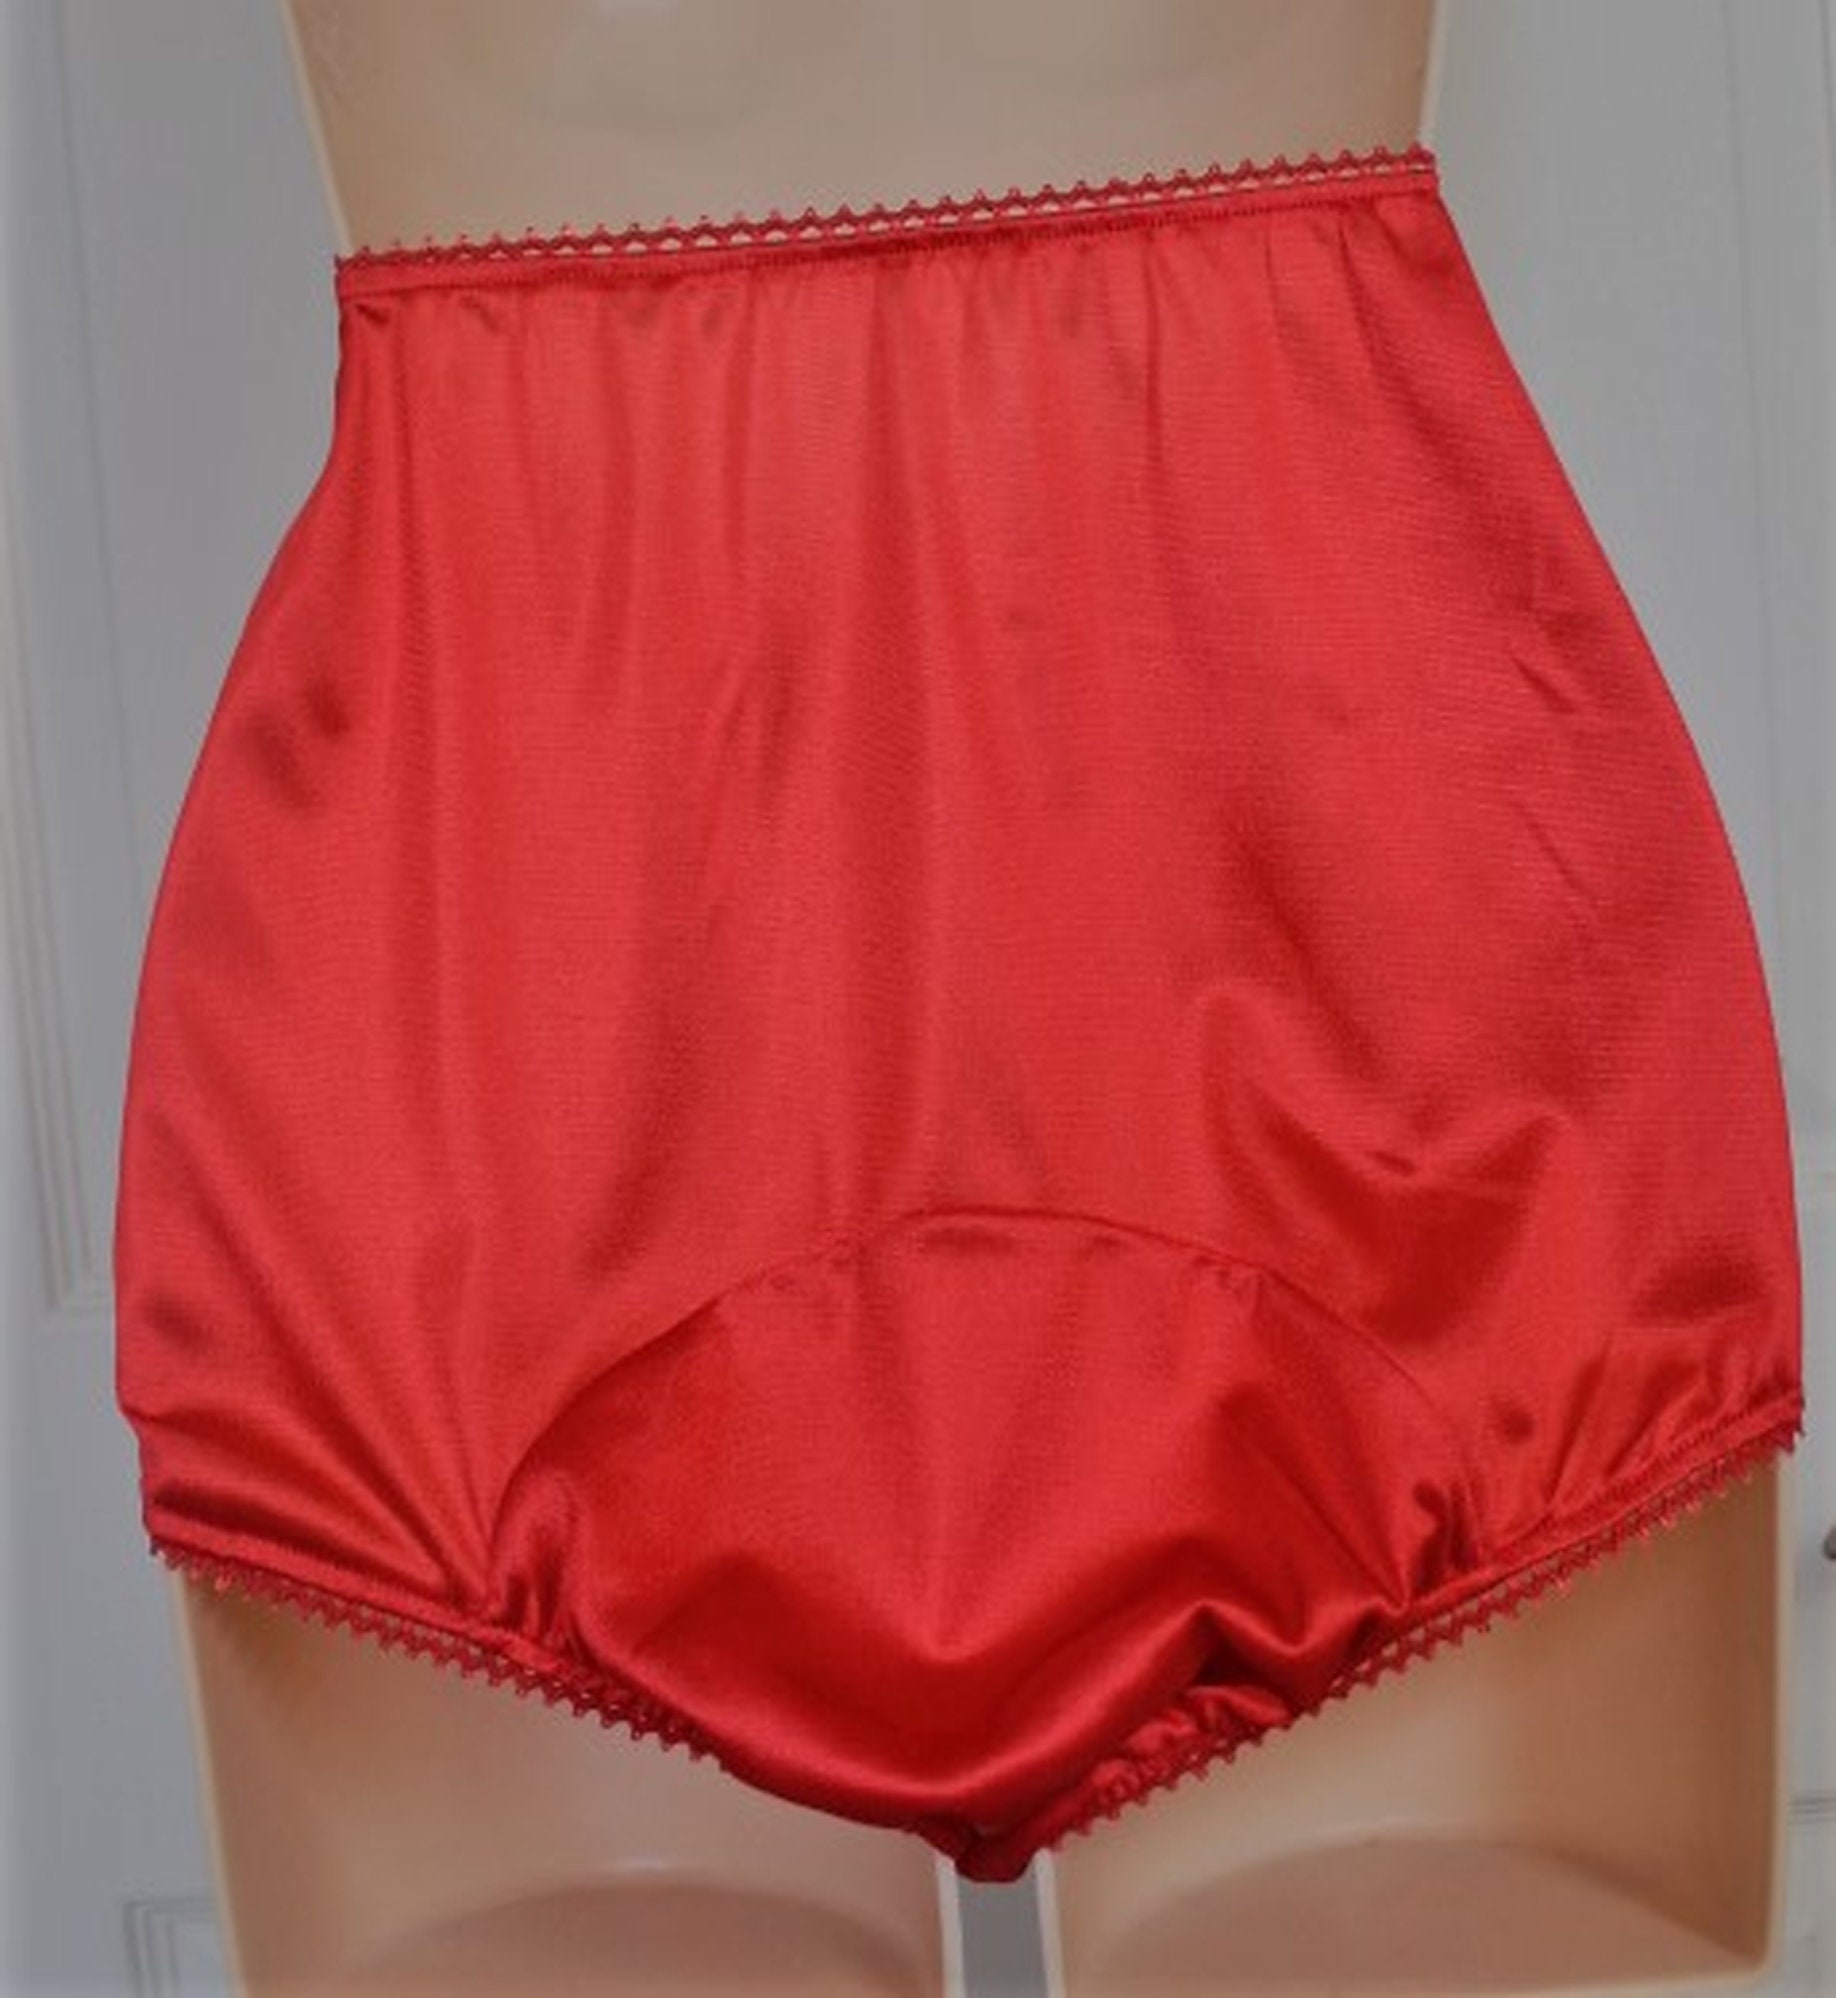 Red Nylon Tricot Panties With Very Large Mushroom Double Nylon Gusset Adult Sissy Retro Vintage